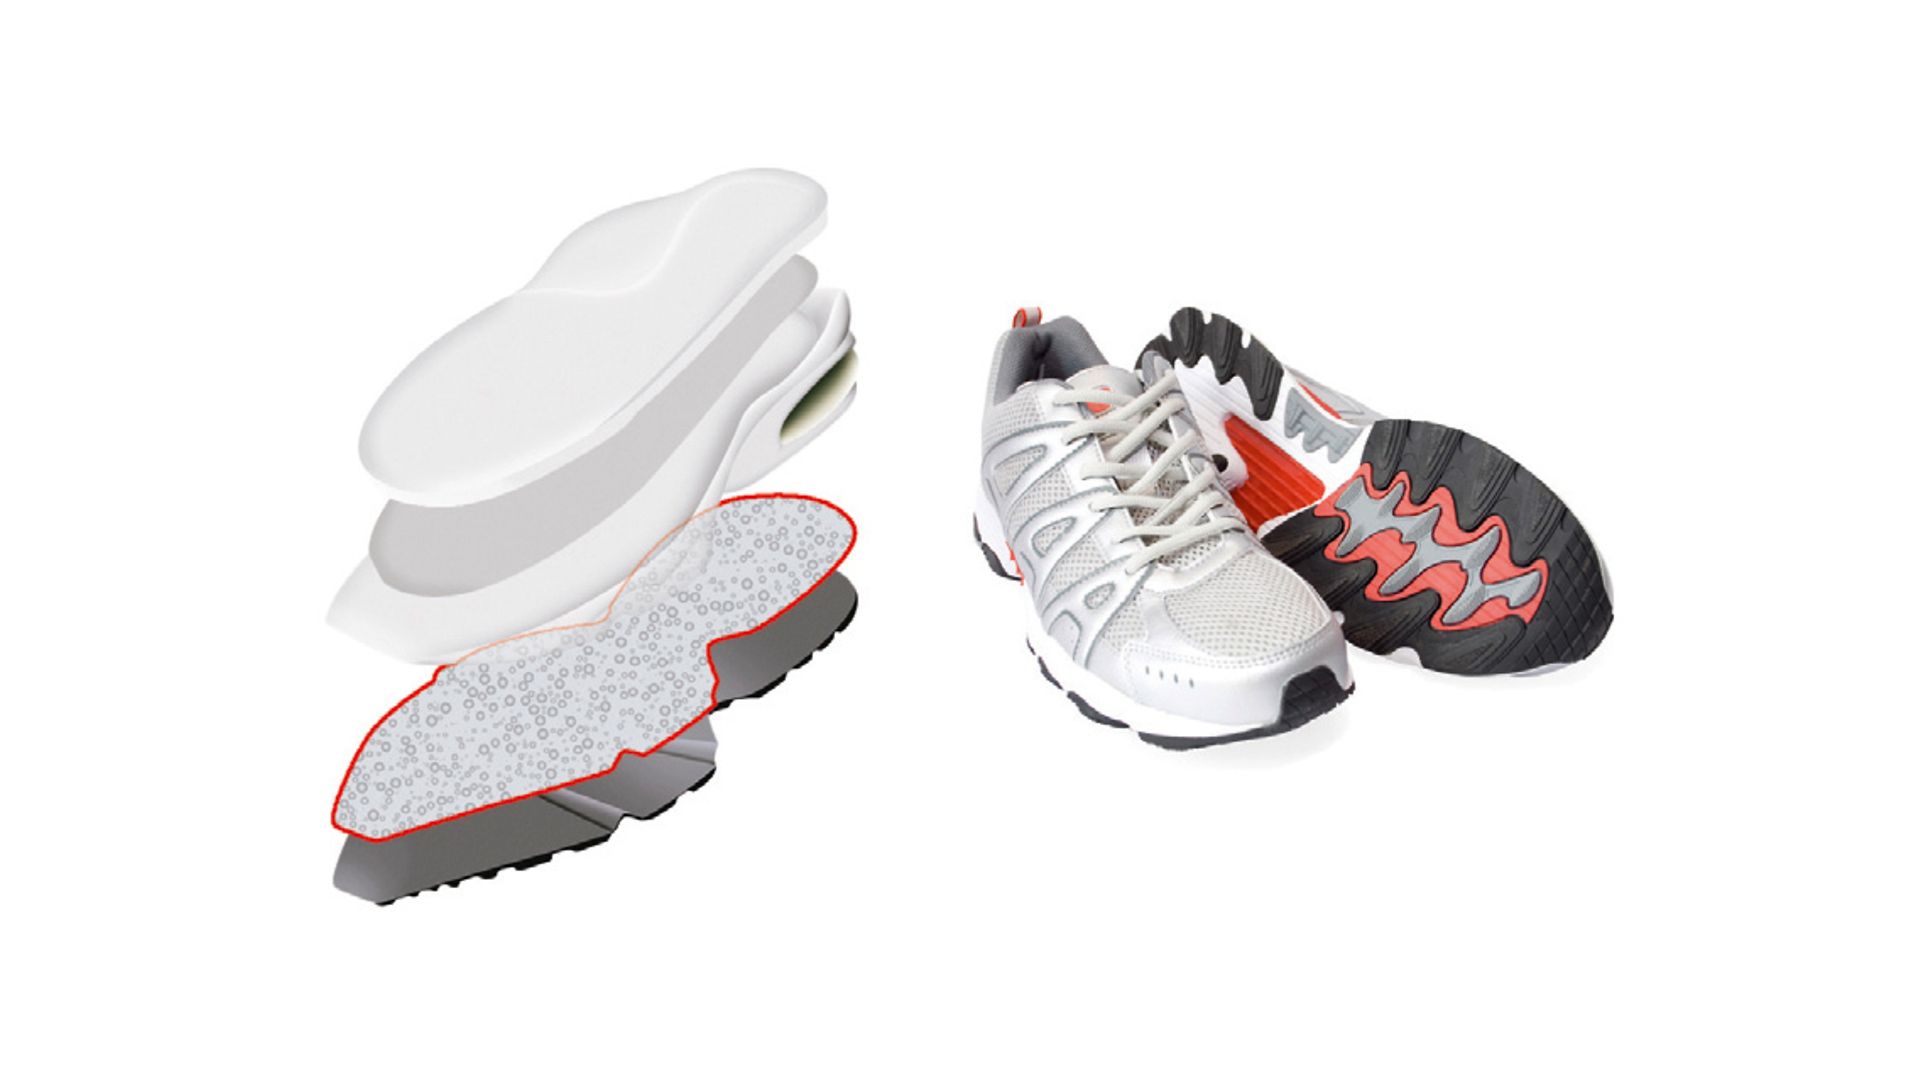 Numerous different adhesives are employed in the manufacture of sports footwear